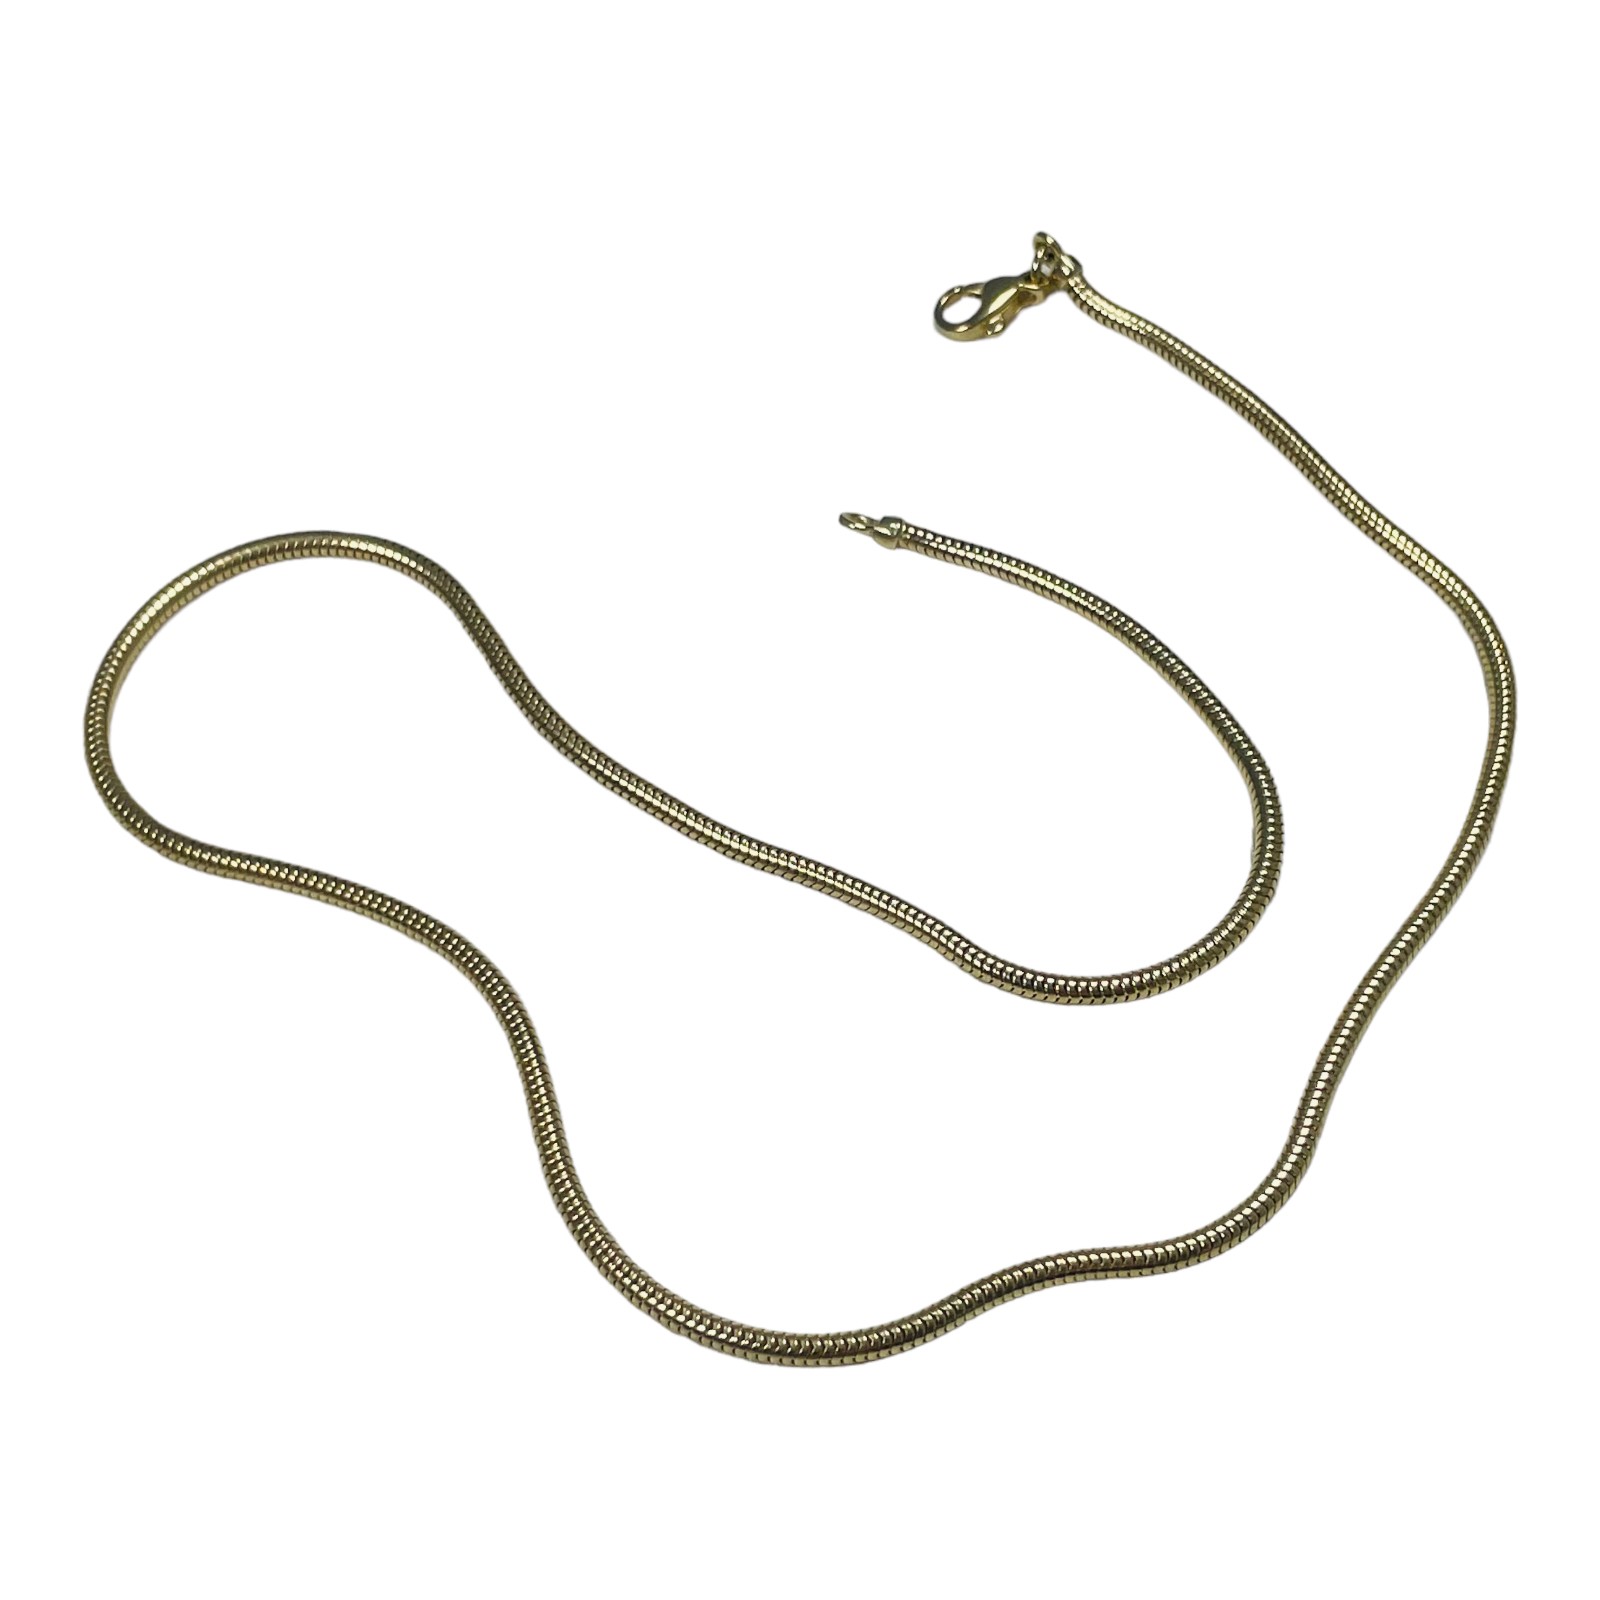 A 9ct yellow gold snake link chain, 18 inches in length, weighs 12.9 grams, Birmingham hallmarks. - Image 4 of 6